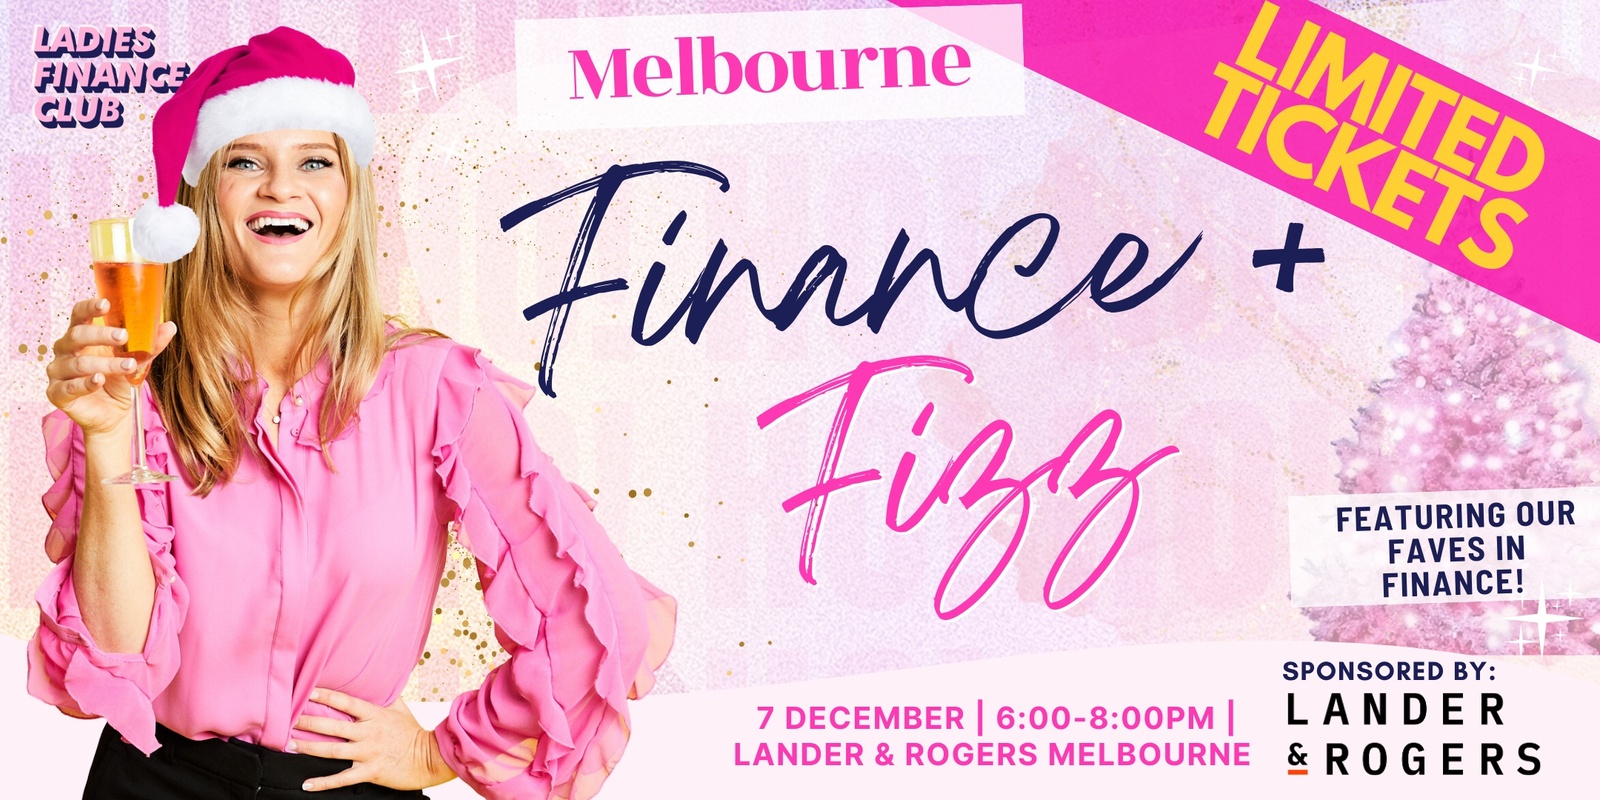 Banner image for Ladies Finance Club: Finance and Fizz Xmas - Melbourne 